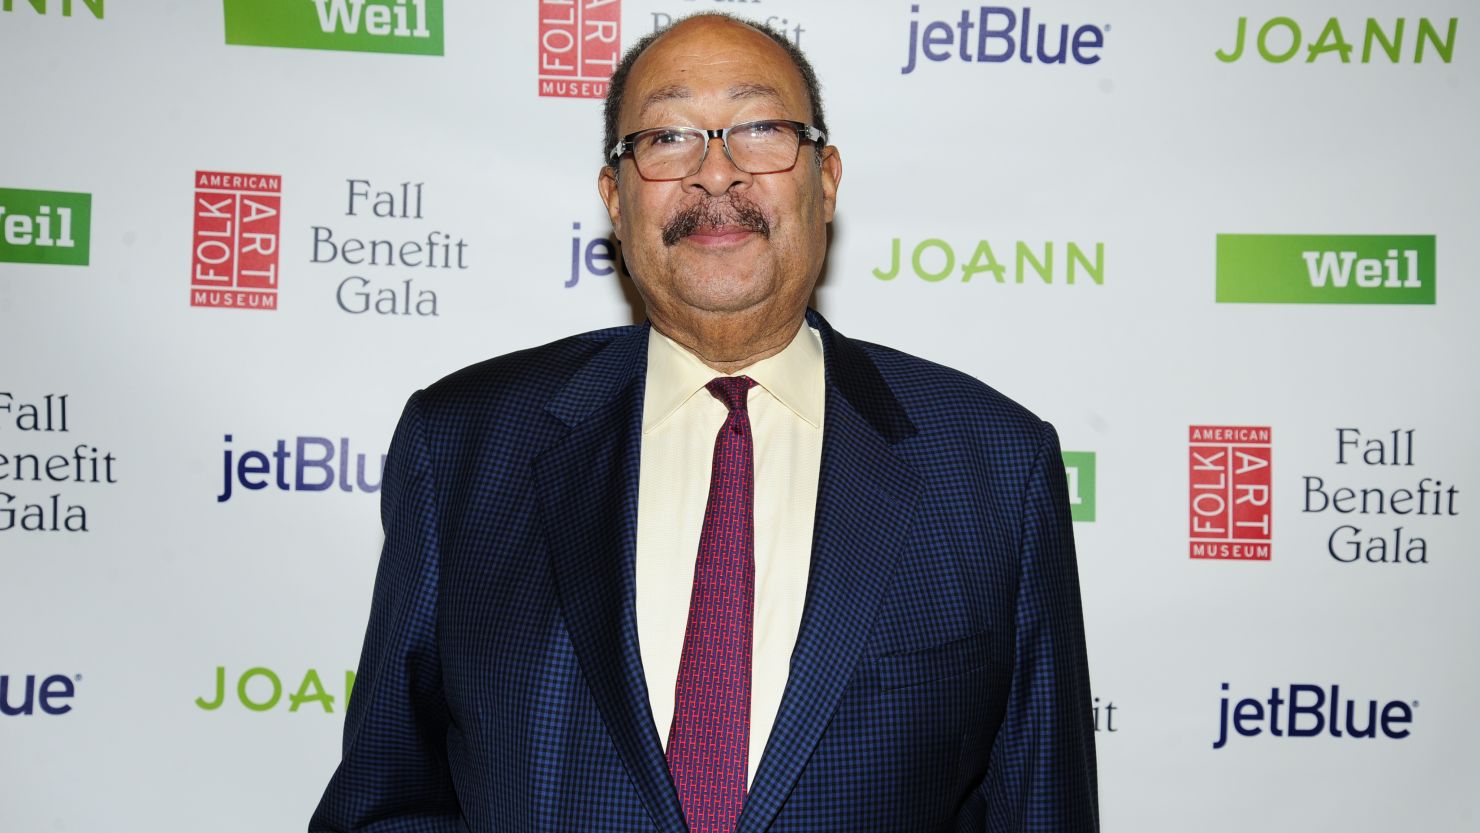 NEW YORK, NY - November 16: Dick Parsons attends the American Folk Art Museum Annual Gala at JW Marriott Essex House on November 16, 2017 in New York City.  (Photo by Paul Bruinooge/Patrick McMullan via Getty Images) 